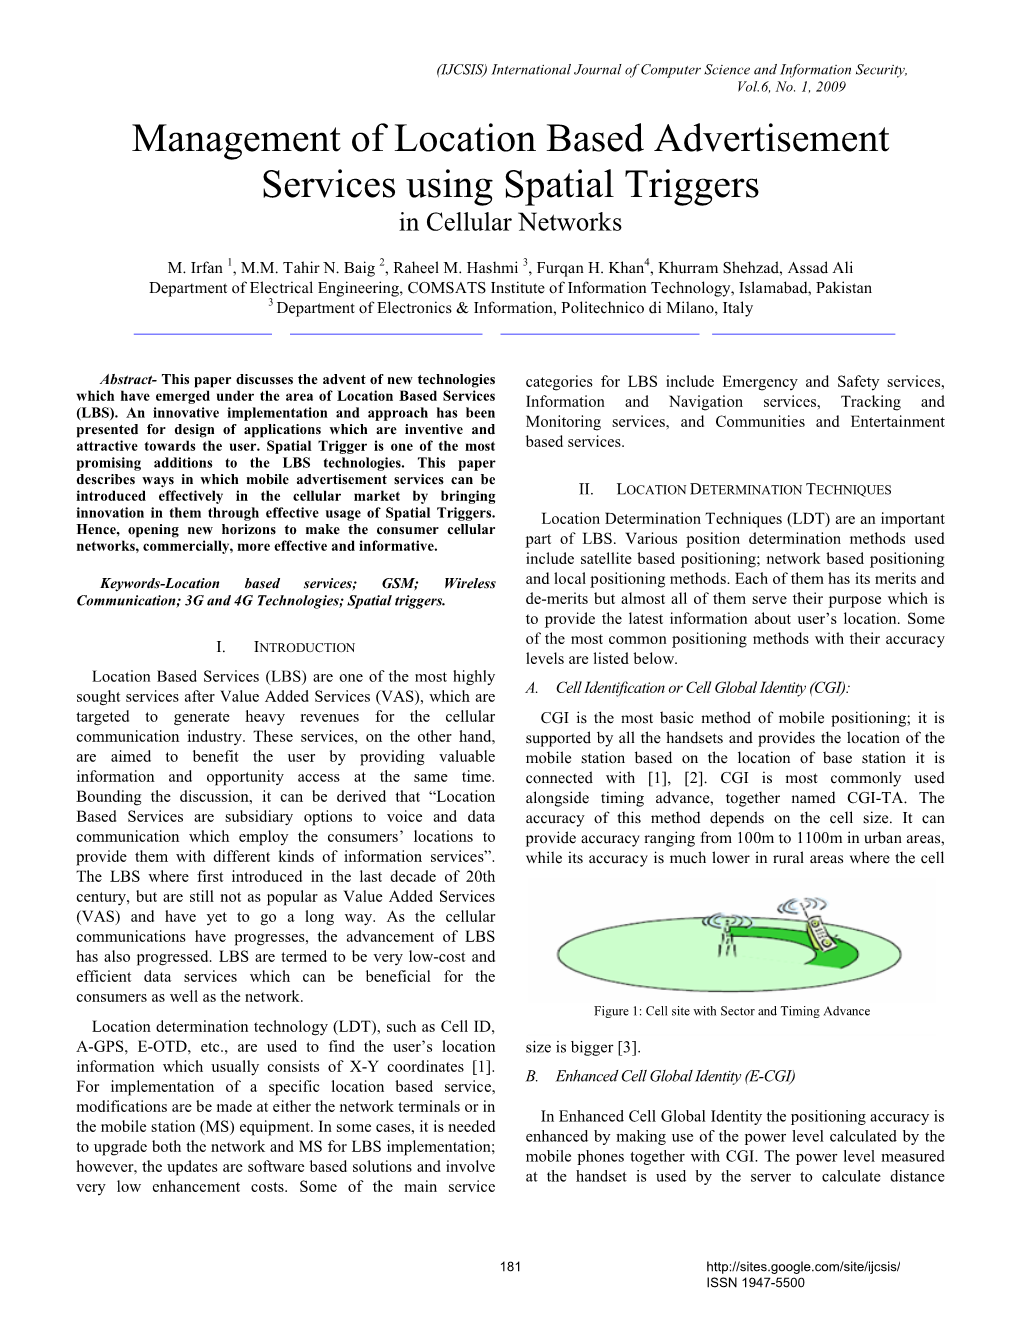 Management of Location Based Advertisement Services Using Spatial Triggers in Cellular Networks